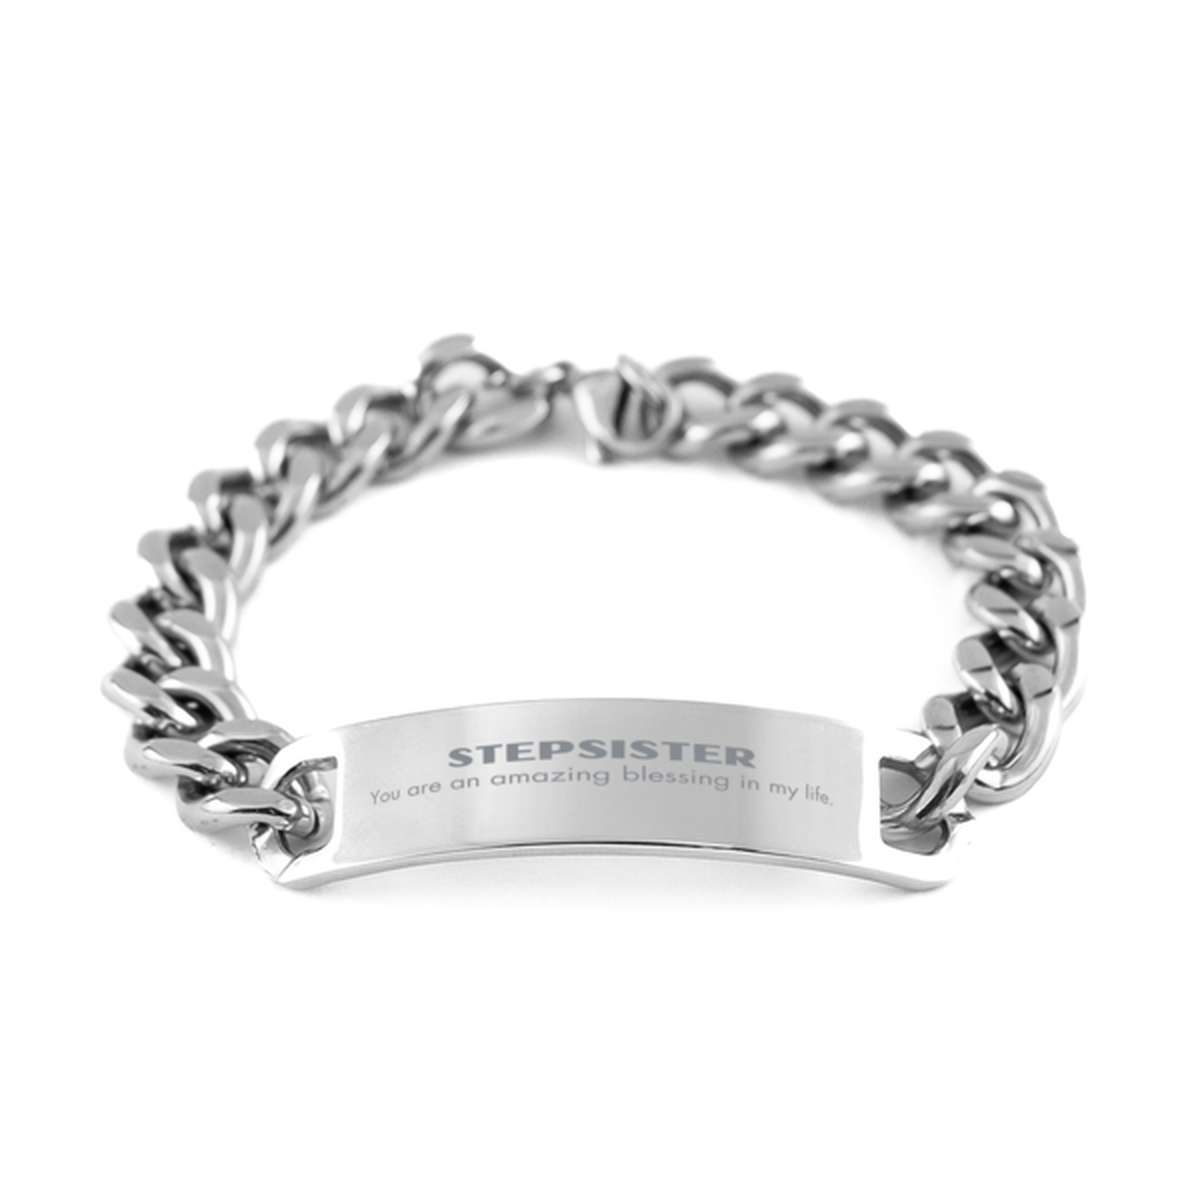 Stepsister Cuban Chain Stainless Steel Bracelet, You are an amazing blessing in my life, Thank You Gifts For Stepsister, Inspirational Birthday Christmas Unique Gifts For Stepsister